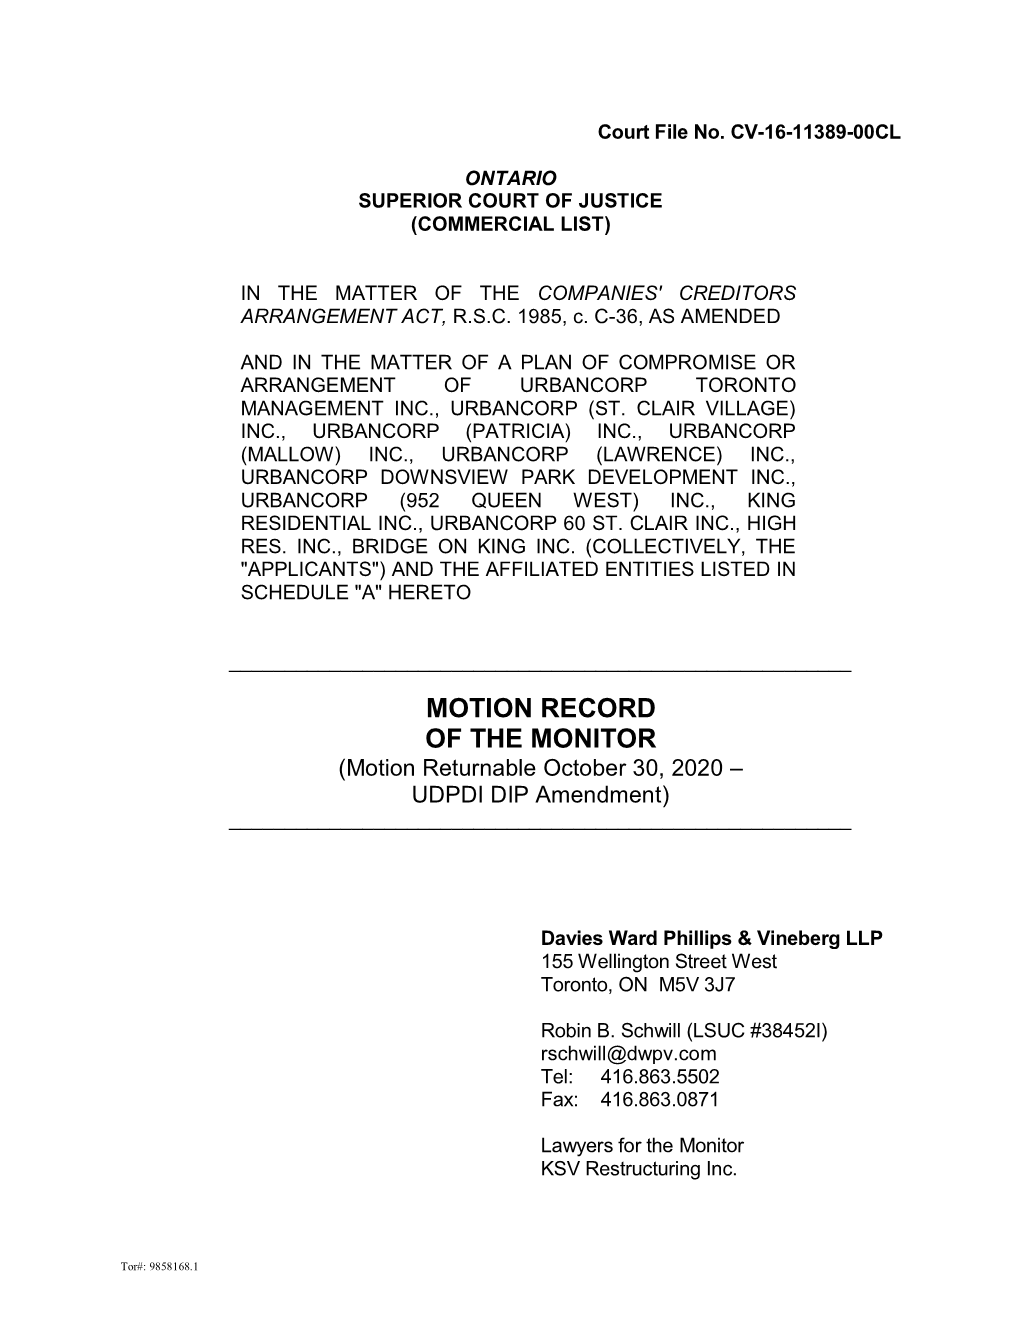 MOTION RECORD of the MONITOR (Motion Returnable October 30, 2020 – UDPDI DIP Amendment) ______